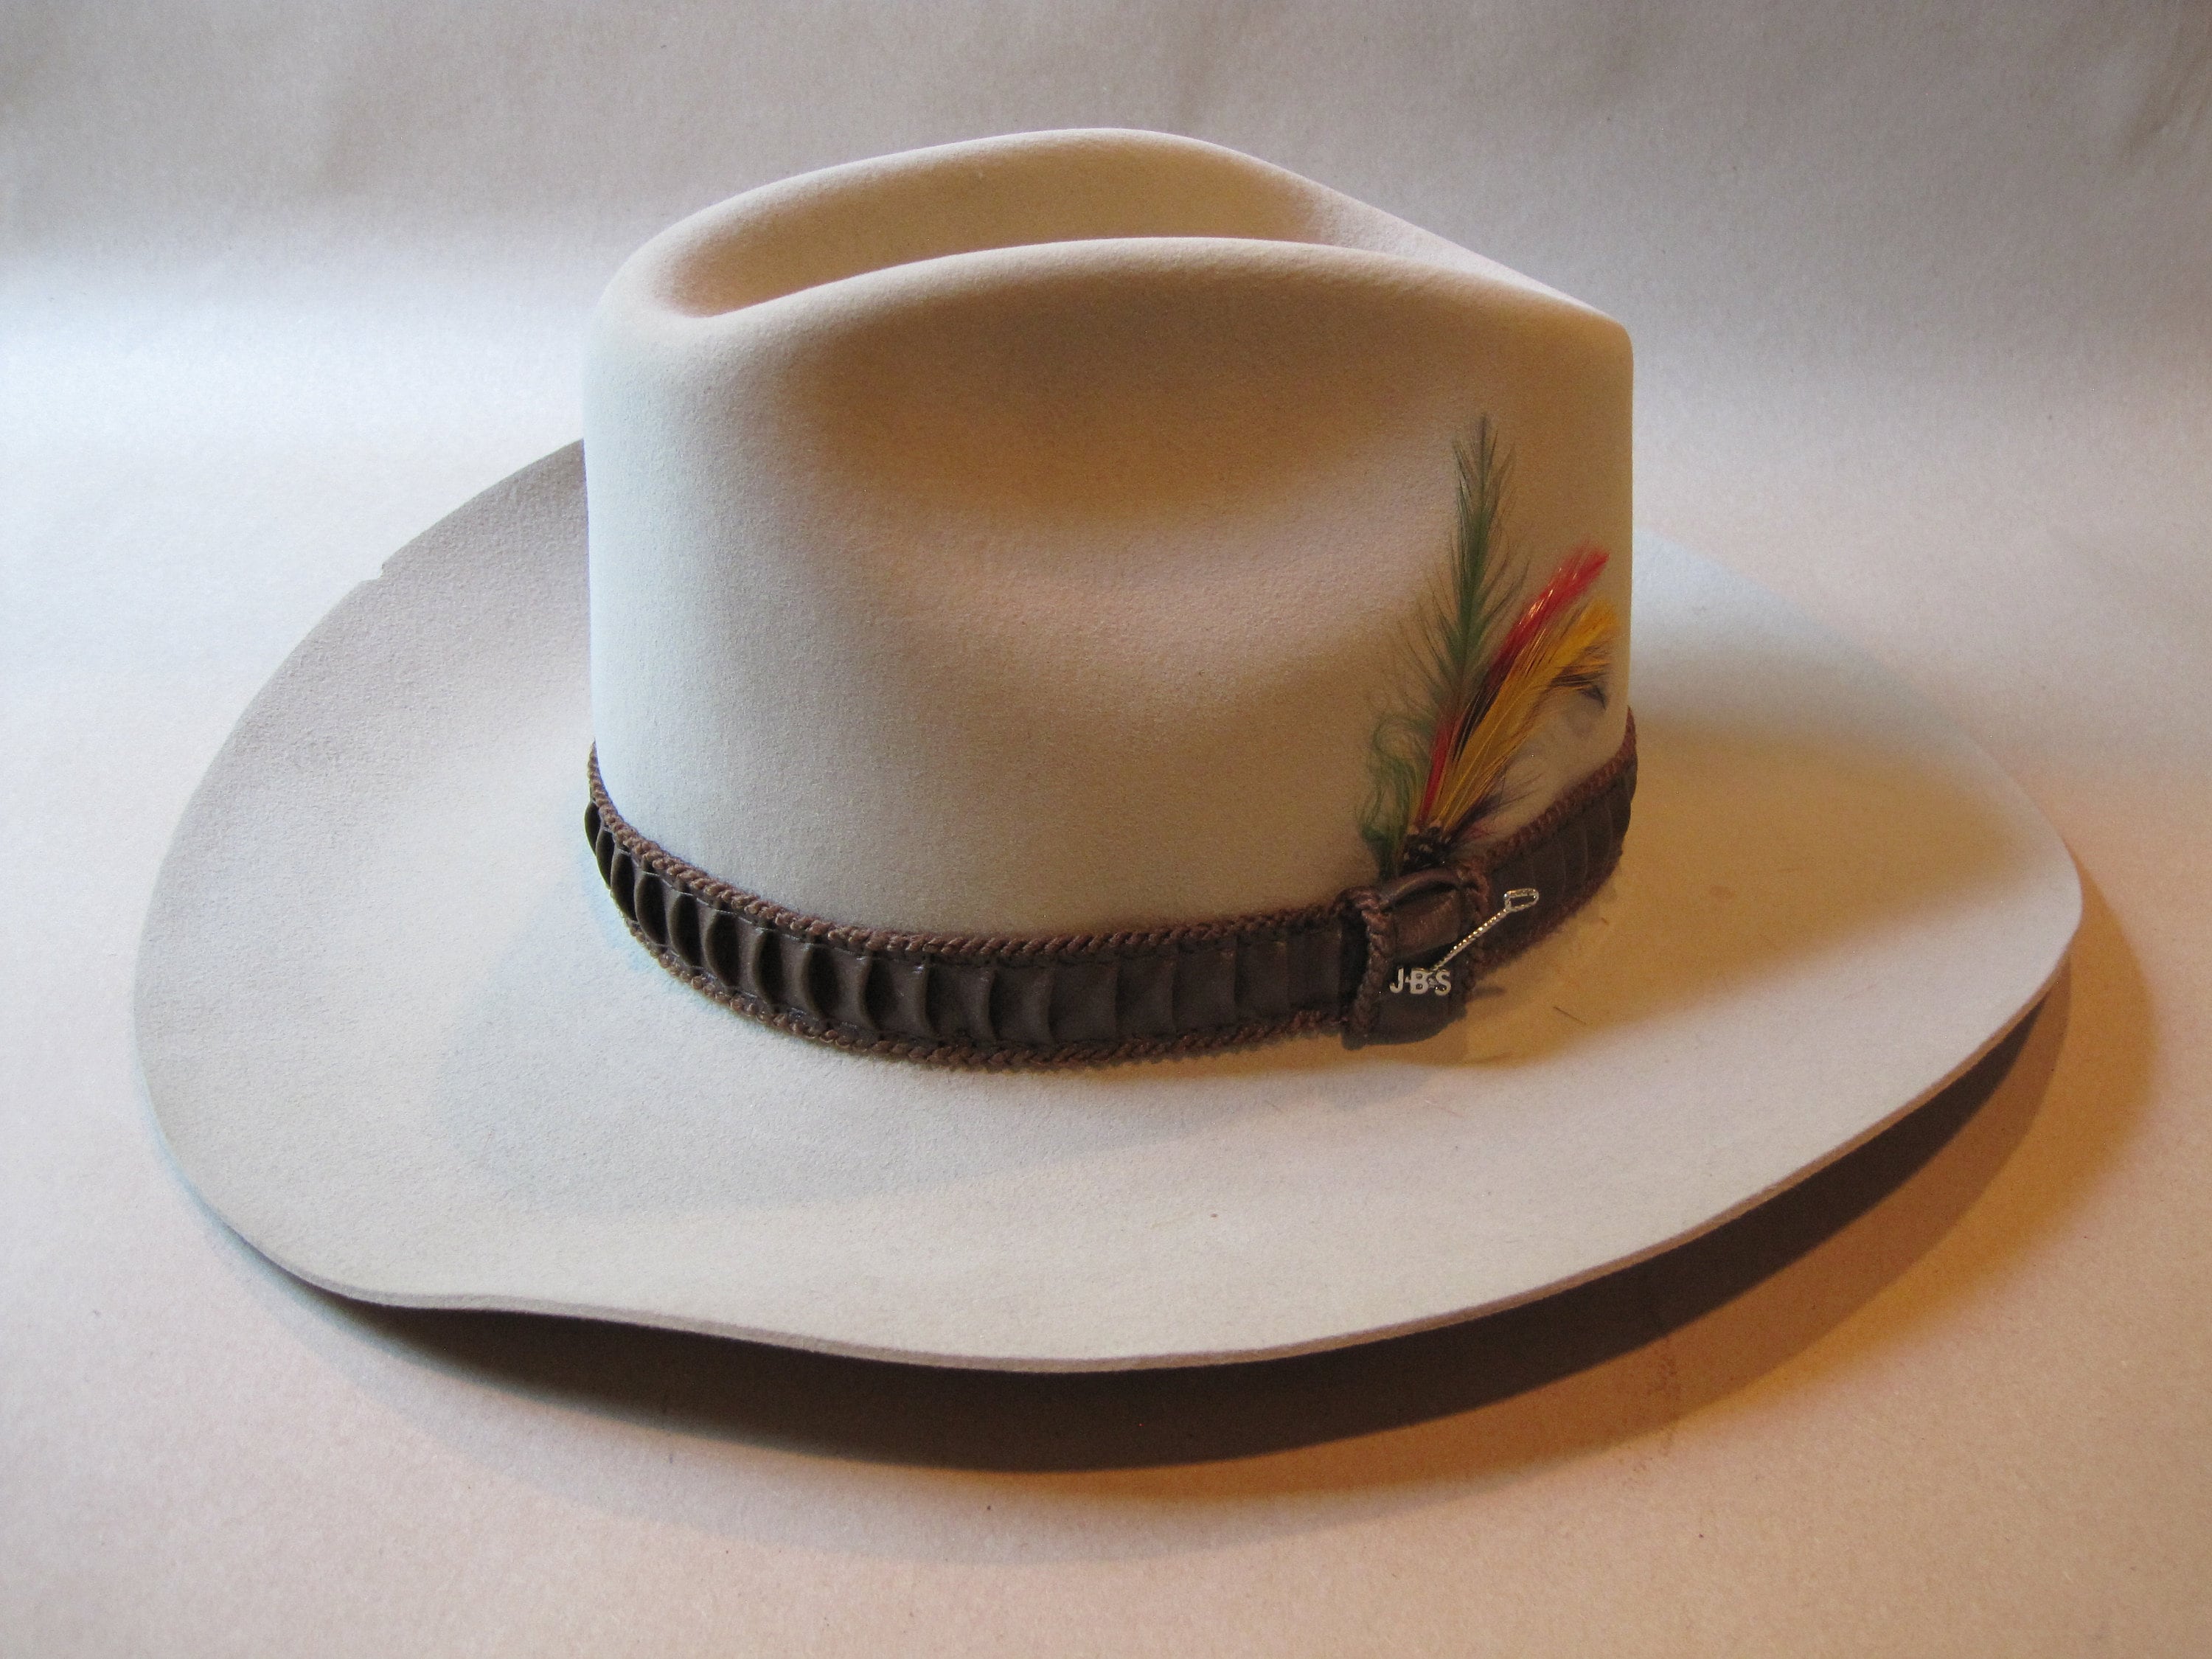 Feather Saver, Hat Feather Tie, Custom Painted Leather Concho Feather Saver, Western Retro Hat Accessories, Art, Attach Feather to Hat